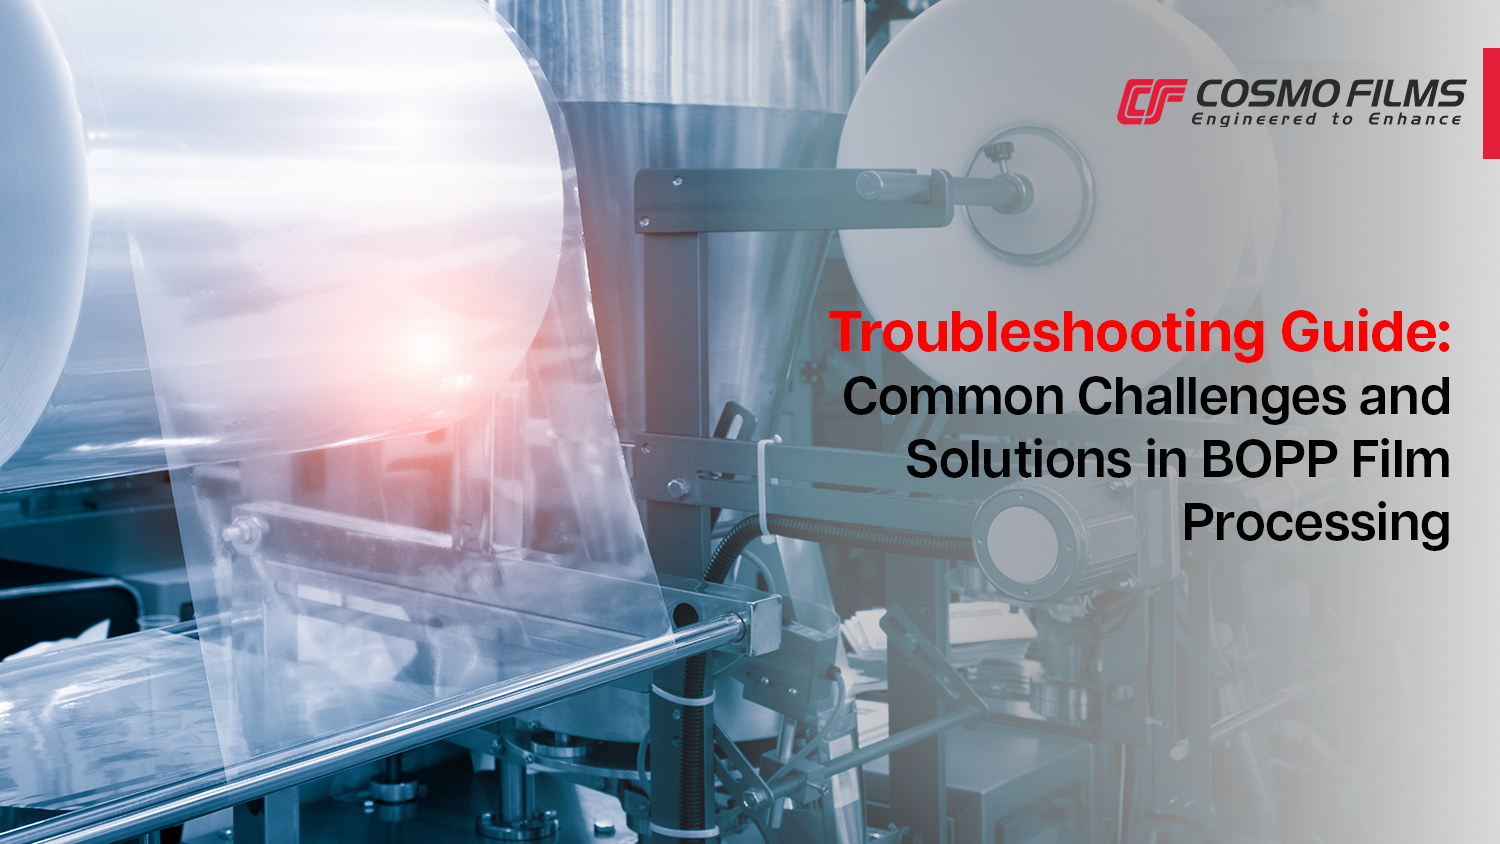 Common Challenges and Solutions in BOPP Film Processing